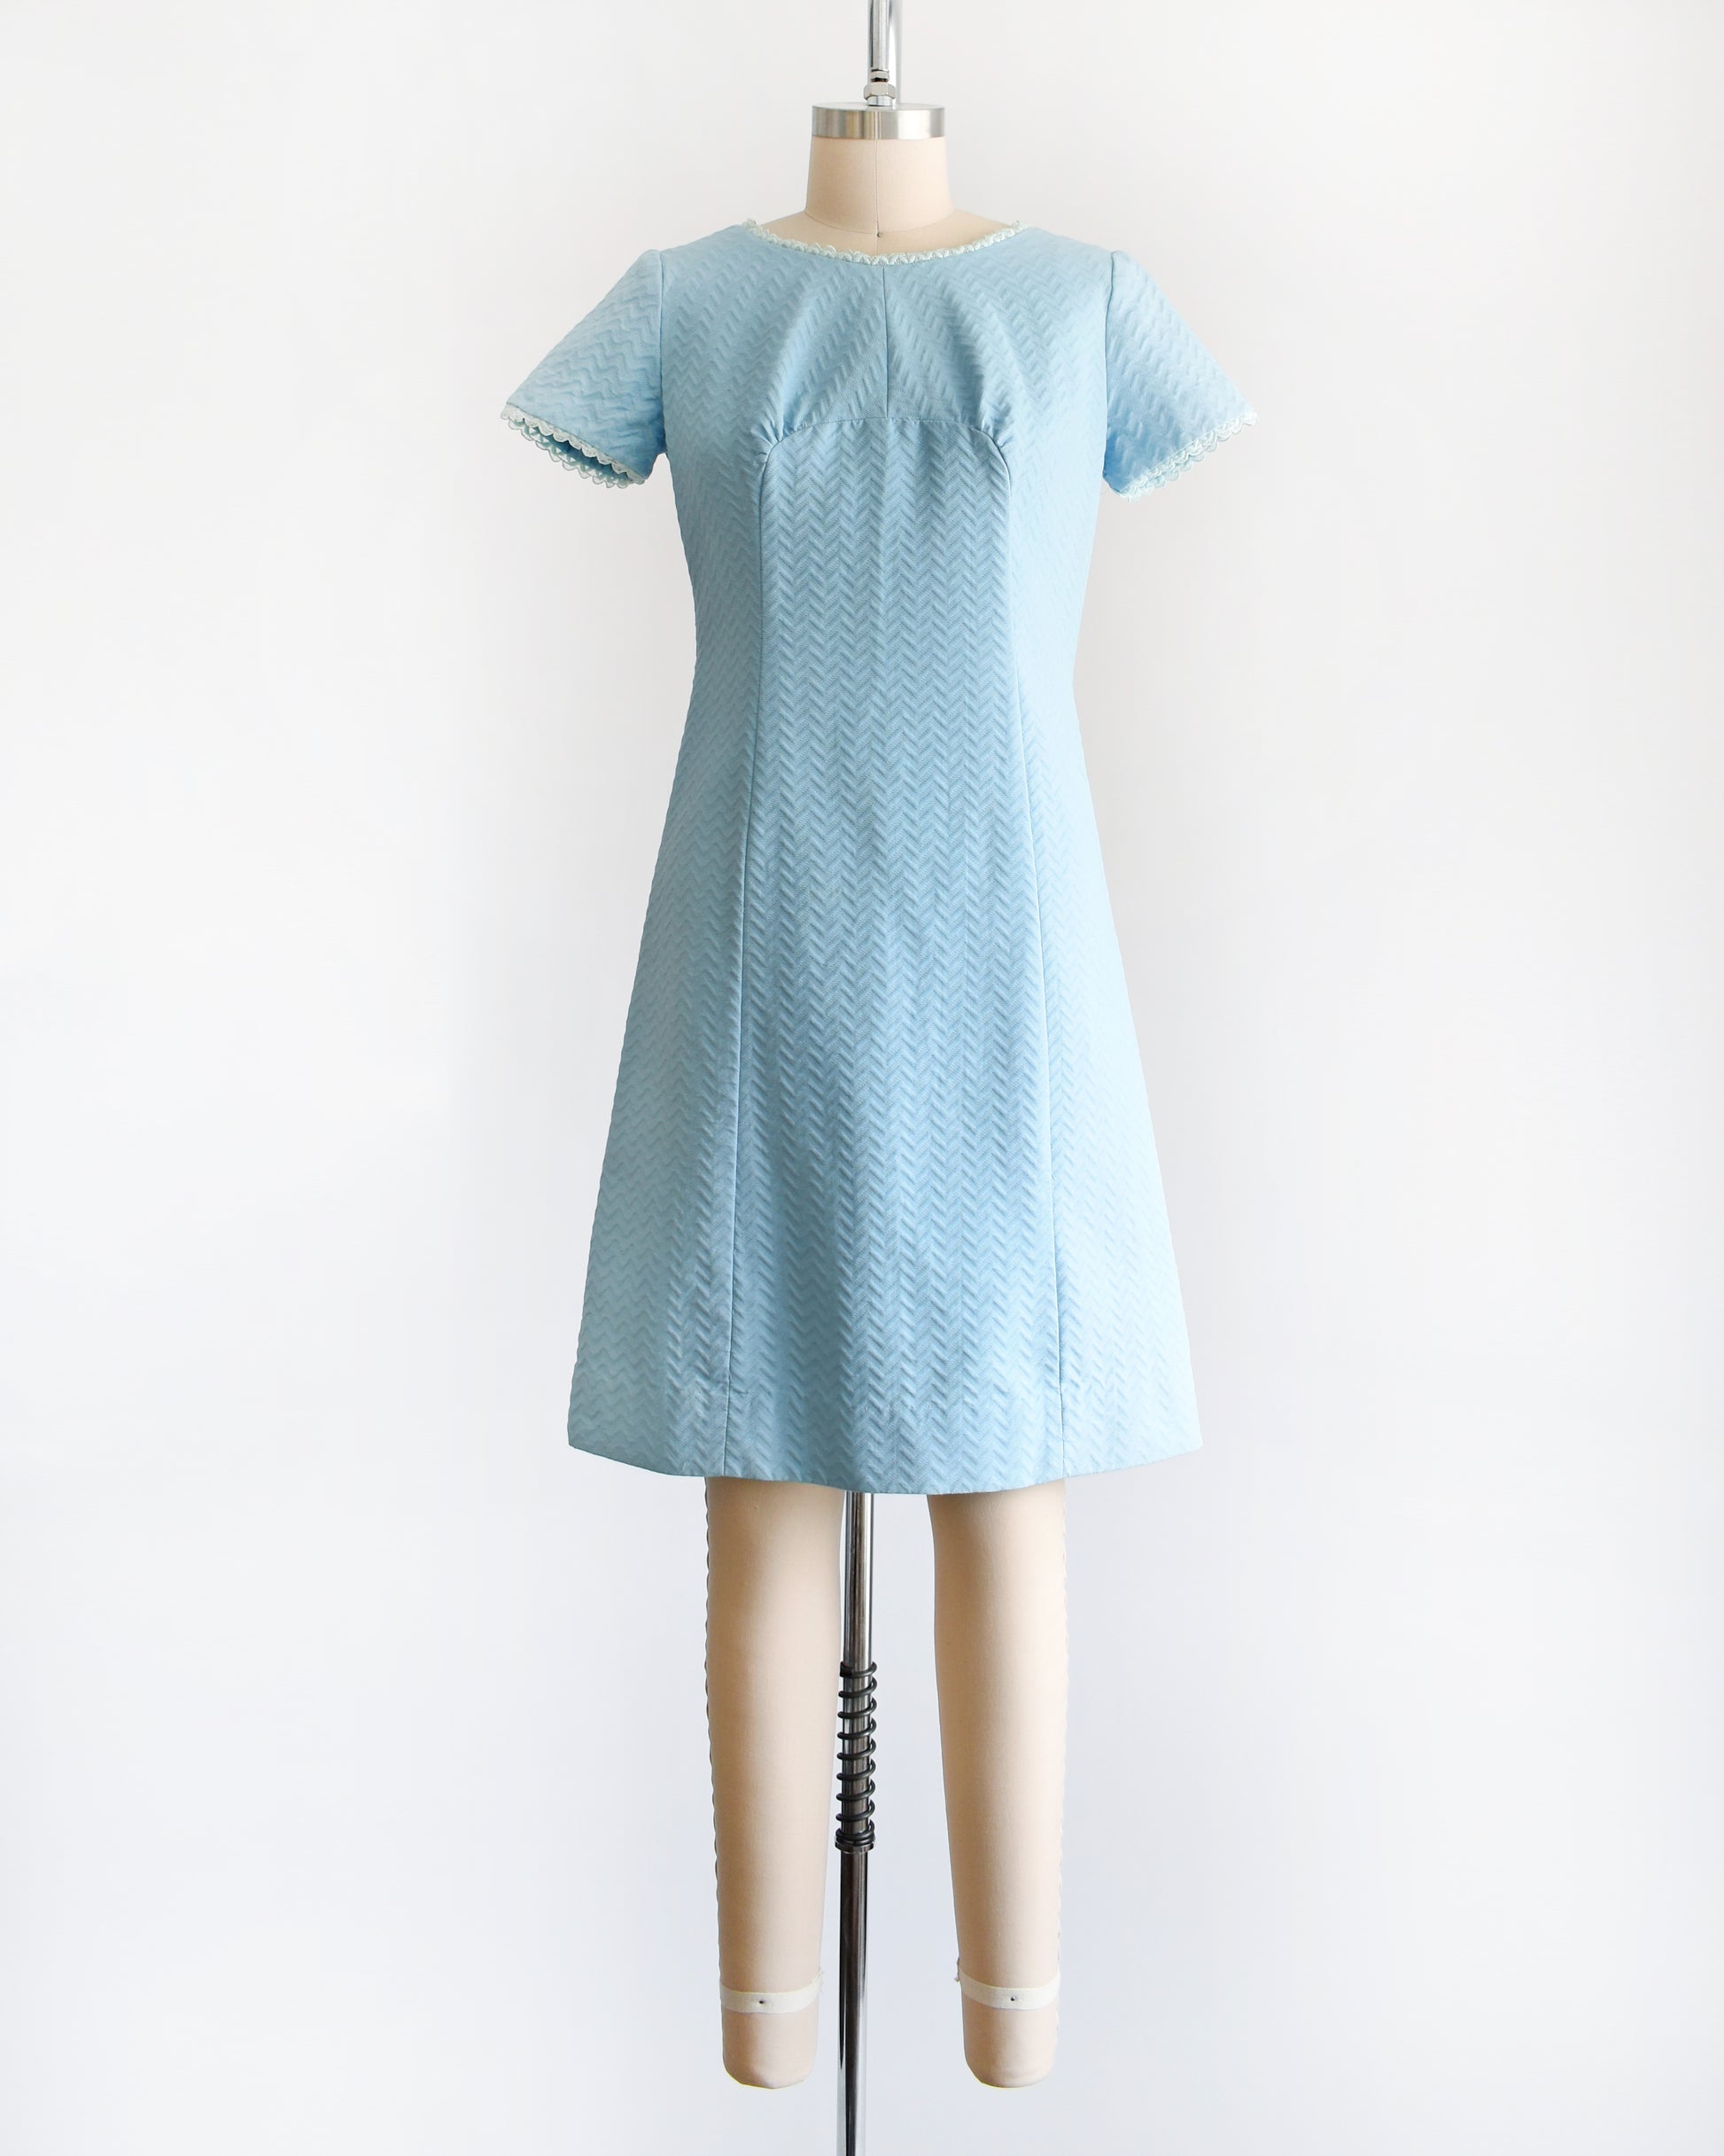 A vintage 1960s mod dress that has textured light blue chevron striped knit with alternating ribbing. 